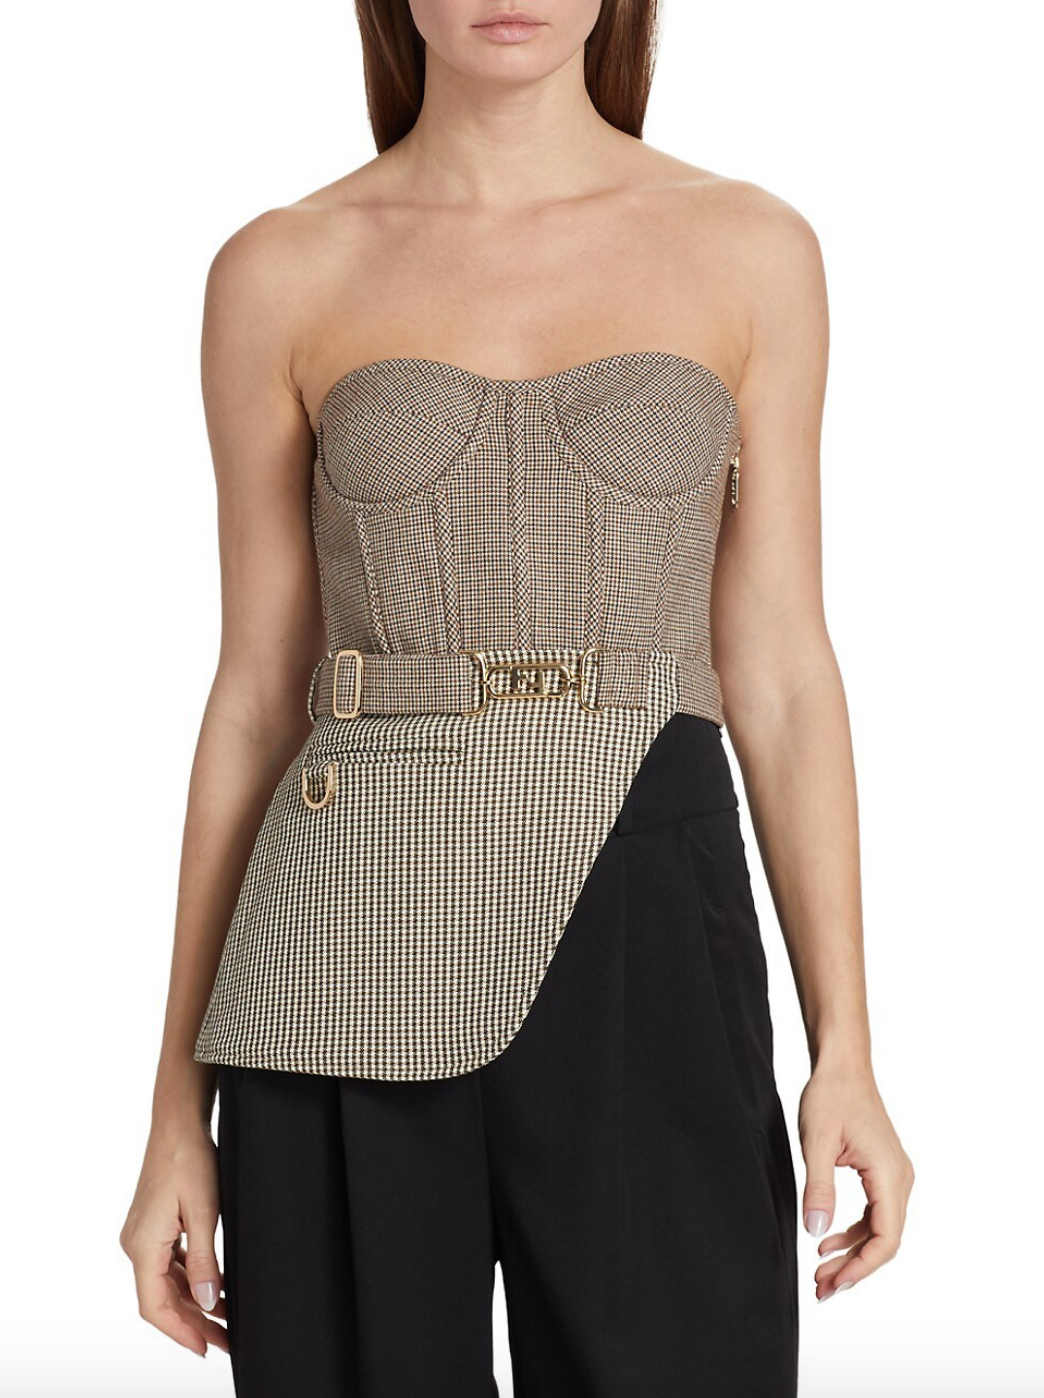 Heather Altman's Houndstooth Belted Asymmetric Corset Top